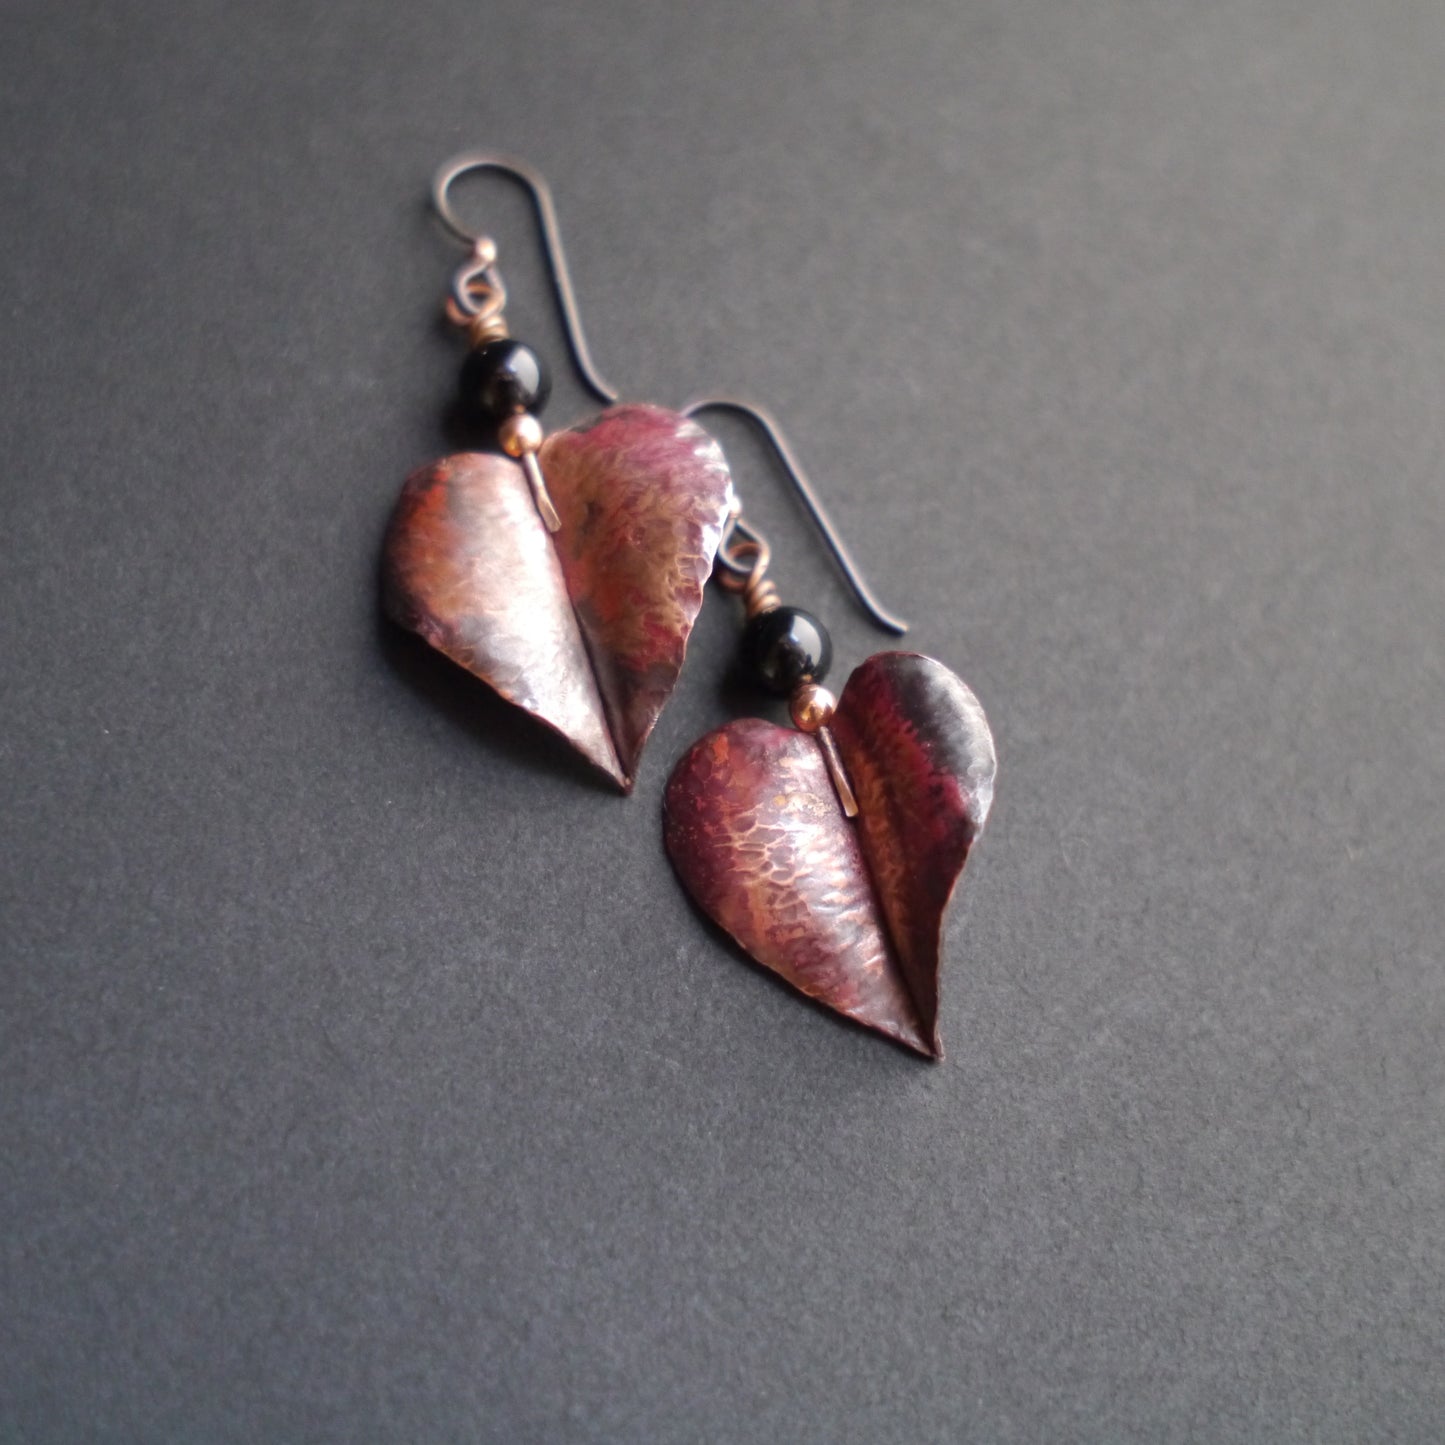 Crimson Leaf Fold-formed Earrings with Onyx Beads